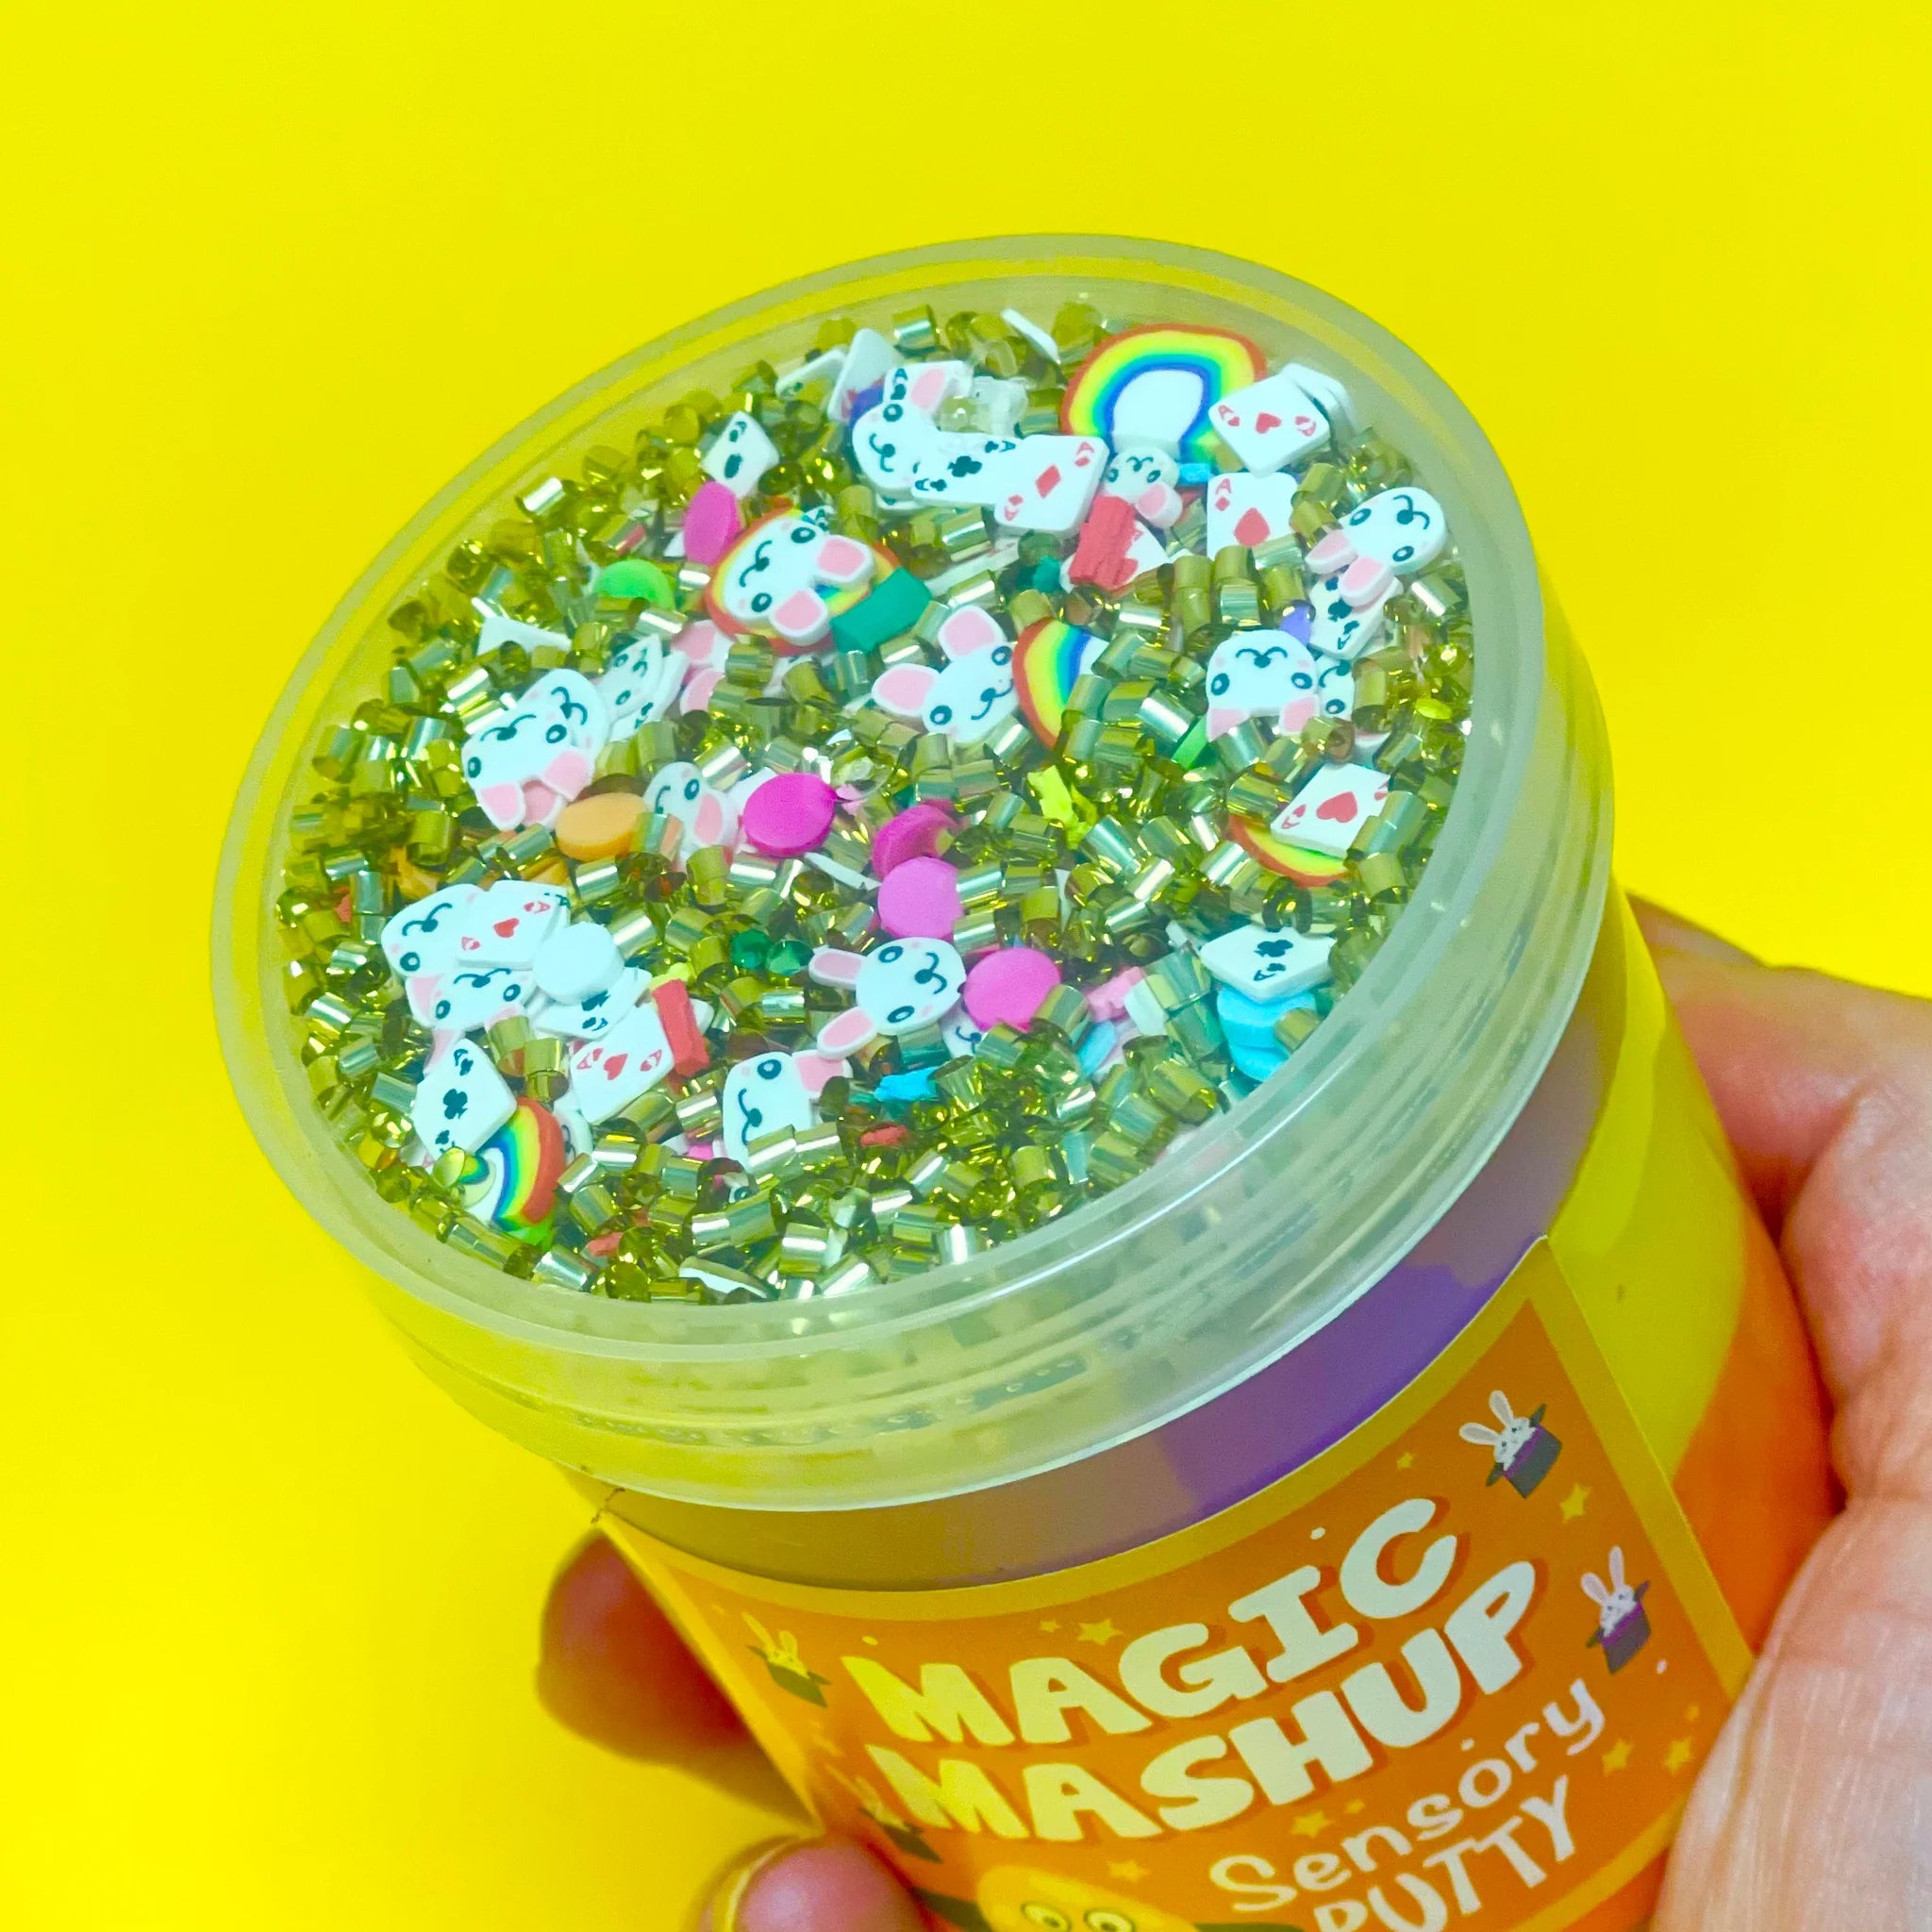 Slime Party Magic Mash Up